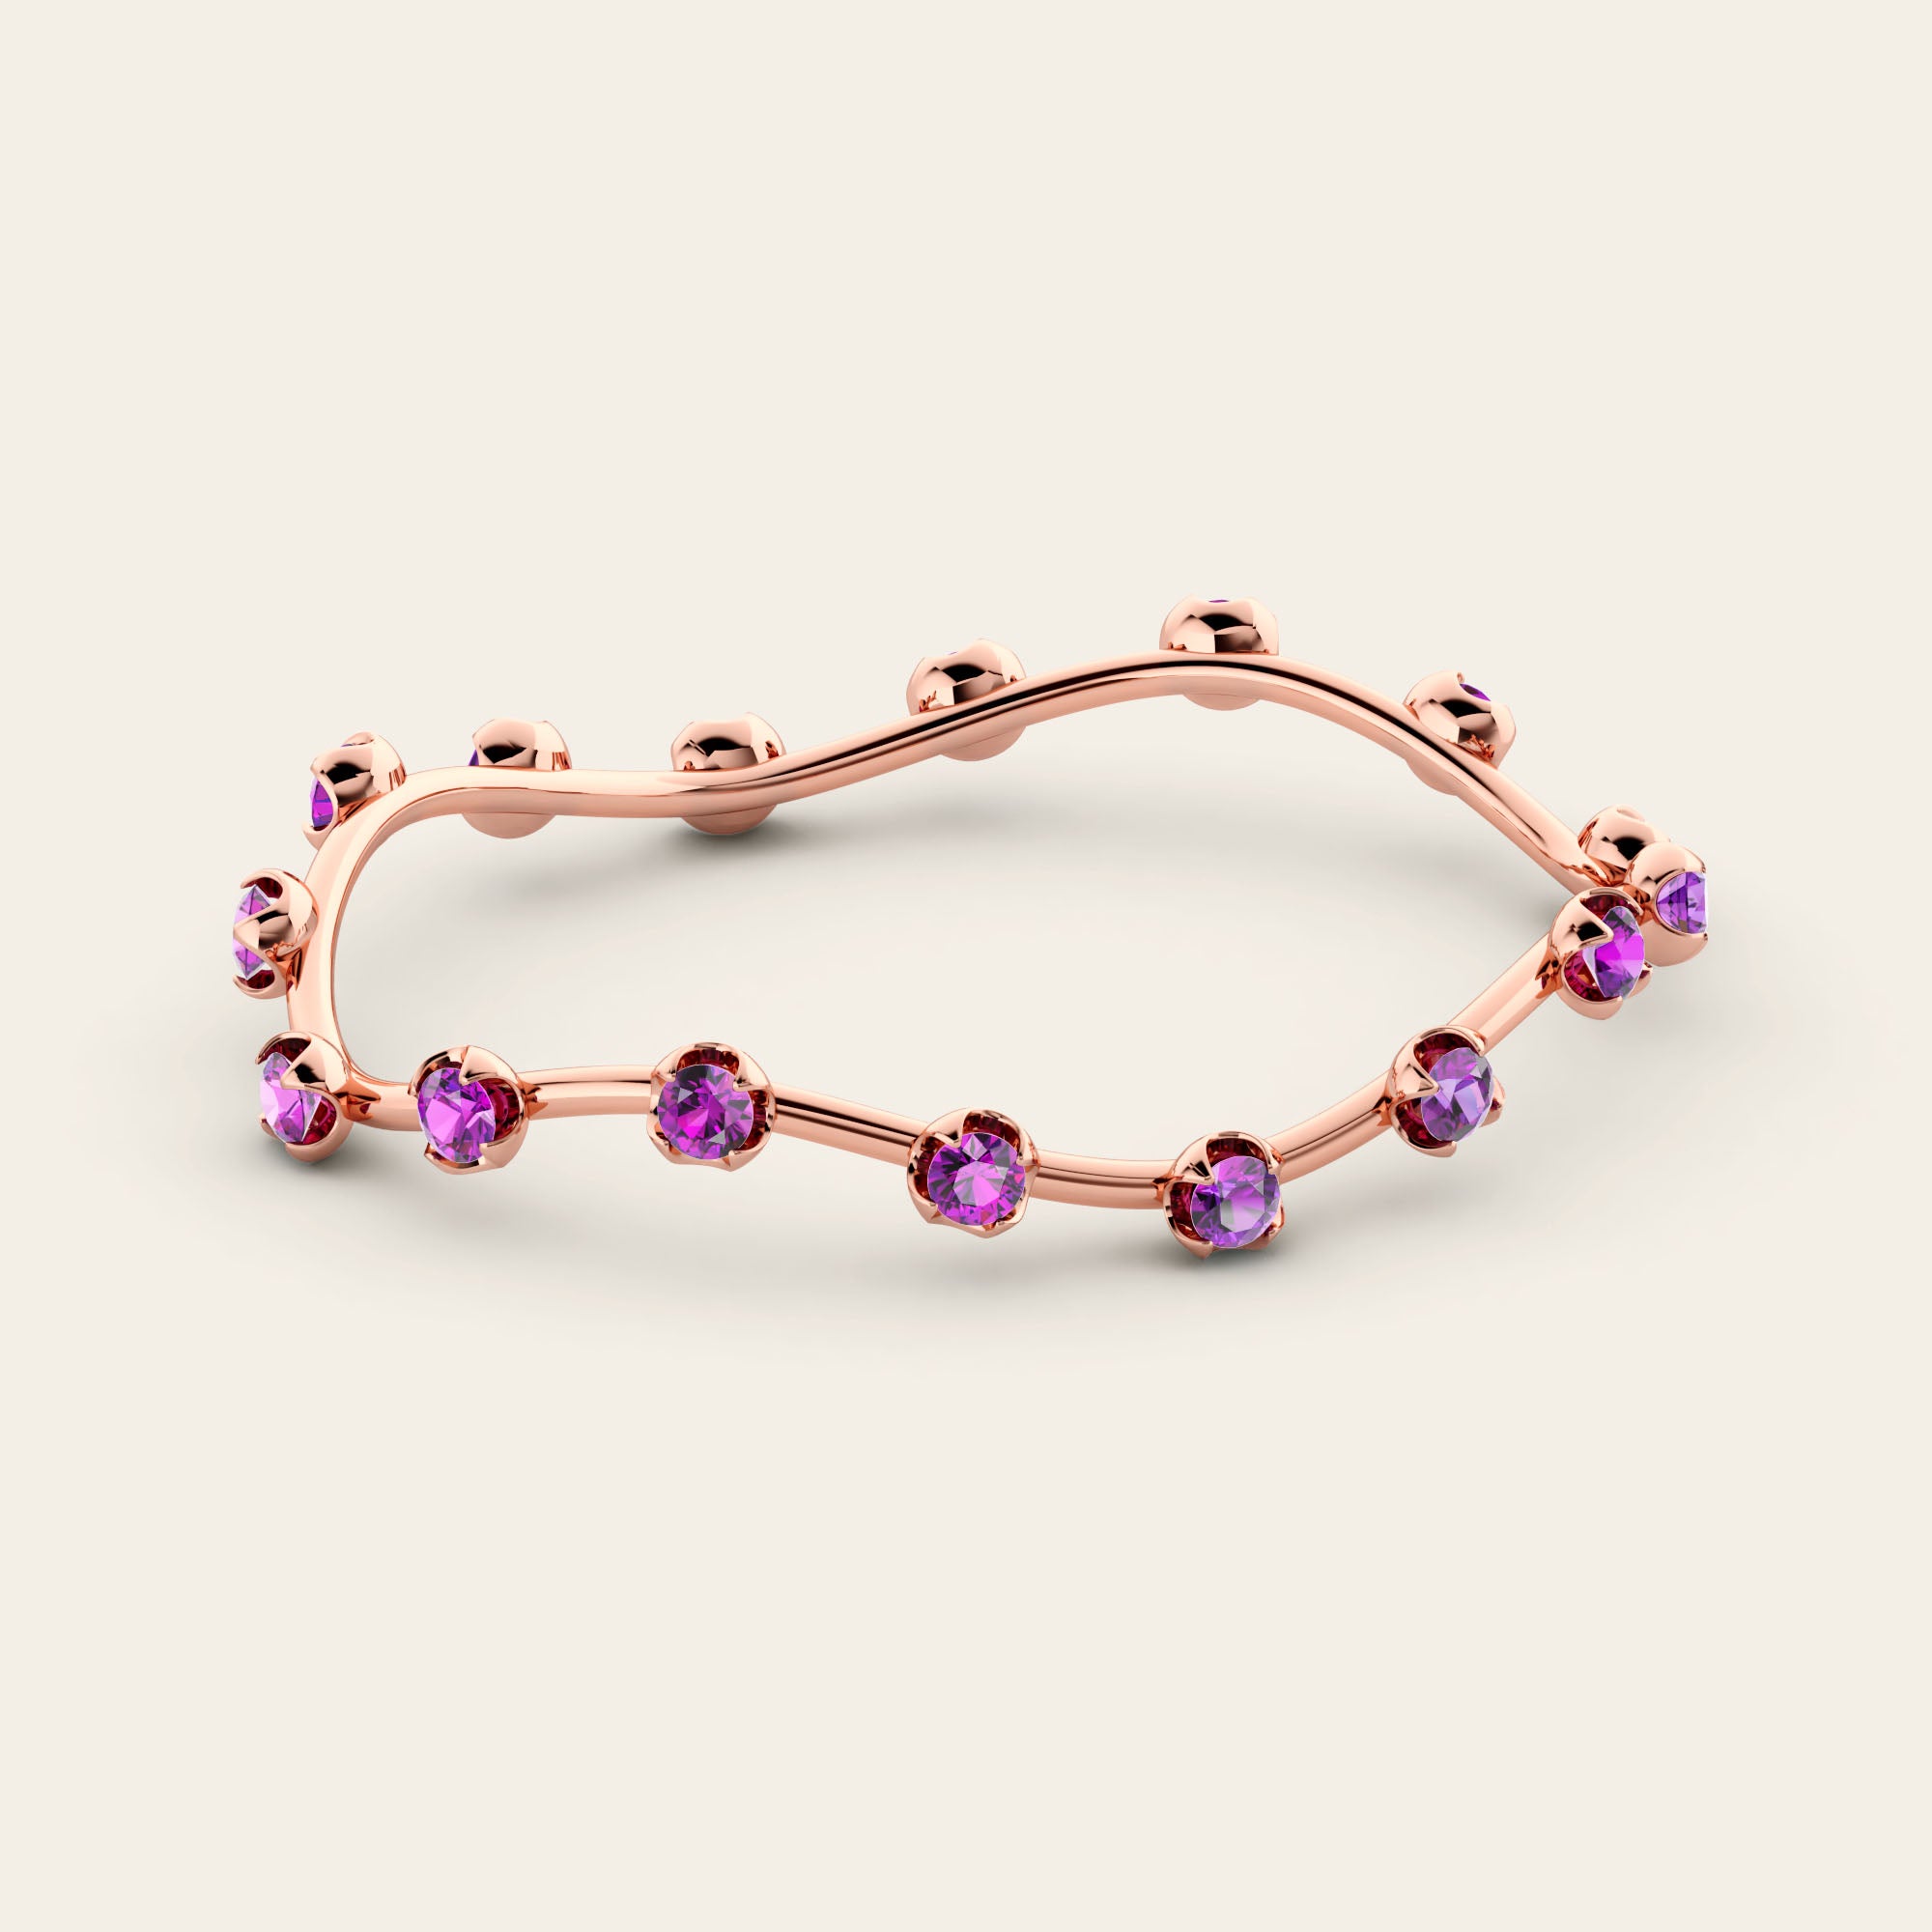 The Curve Bangle with Purple Garnets in 18k Rose Gold